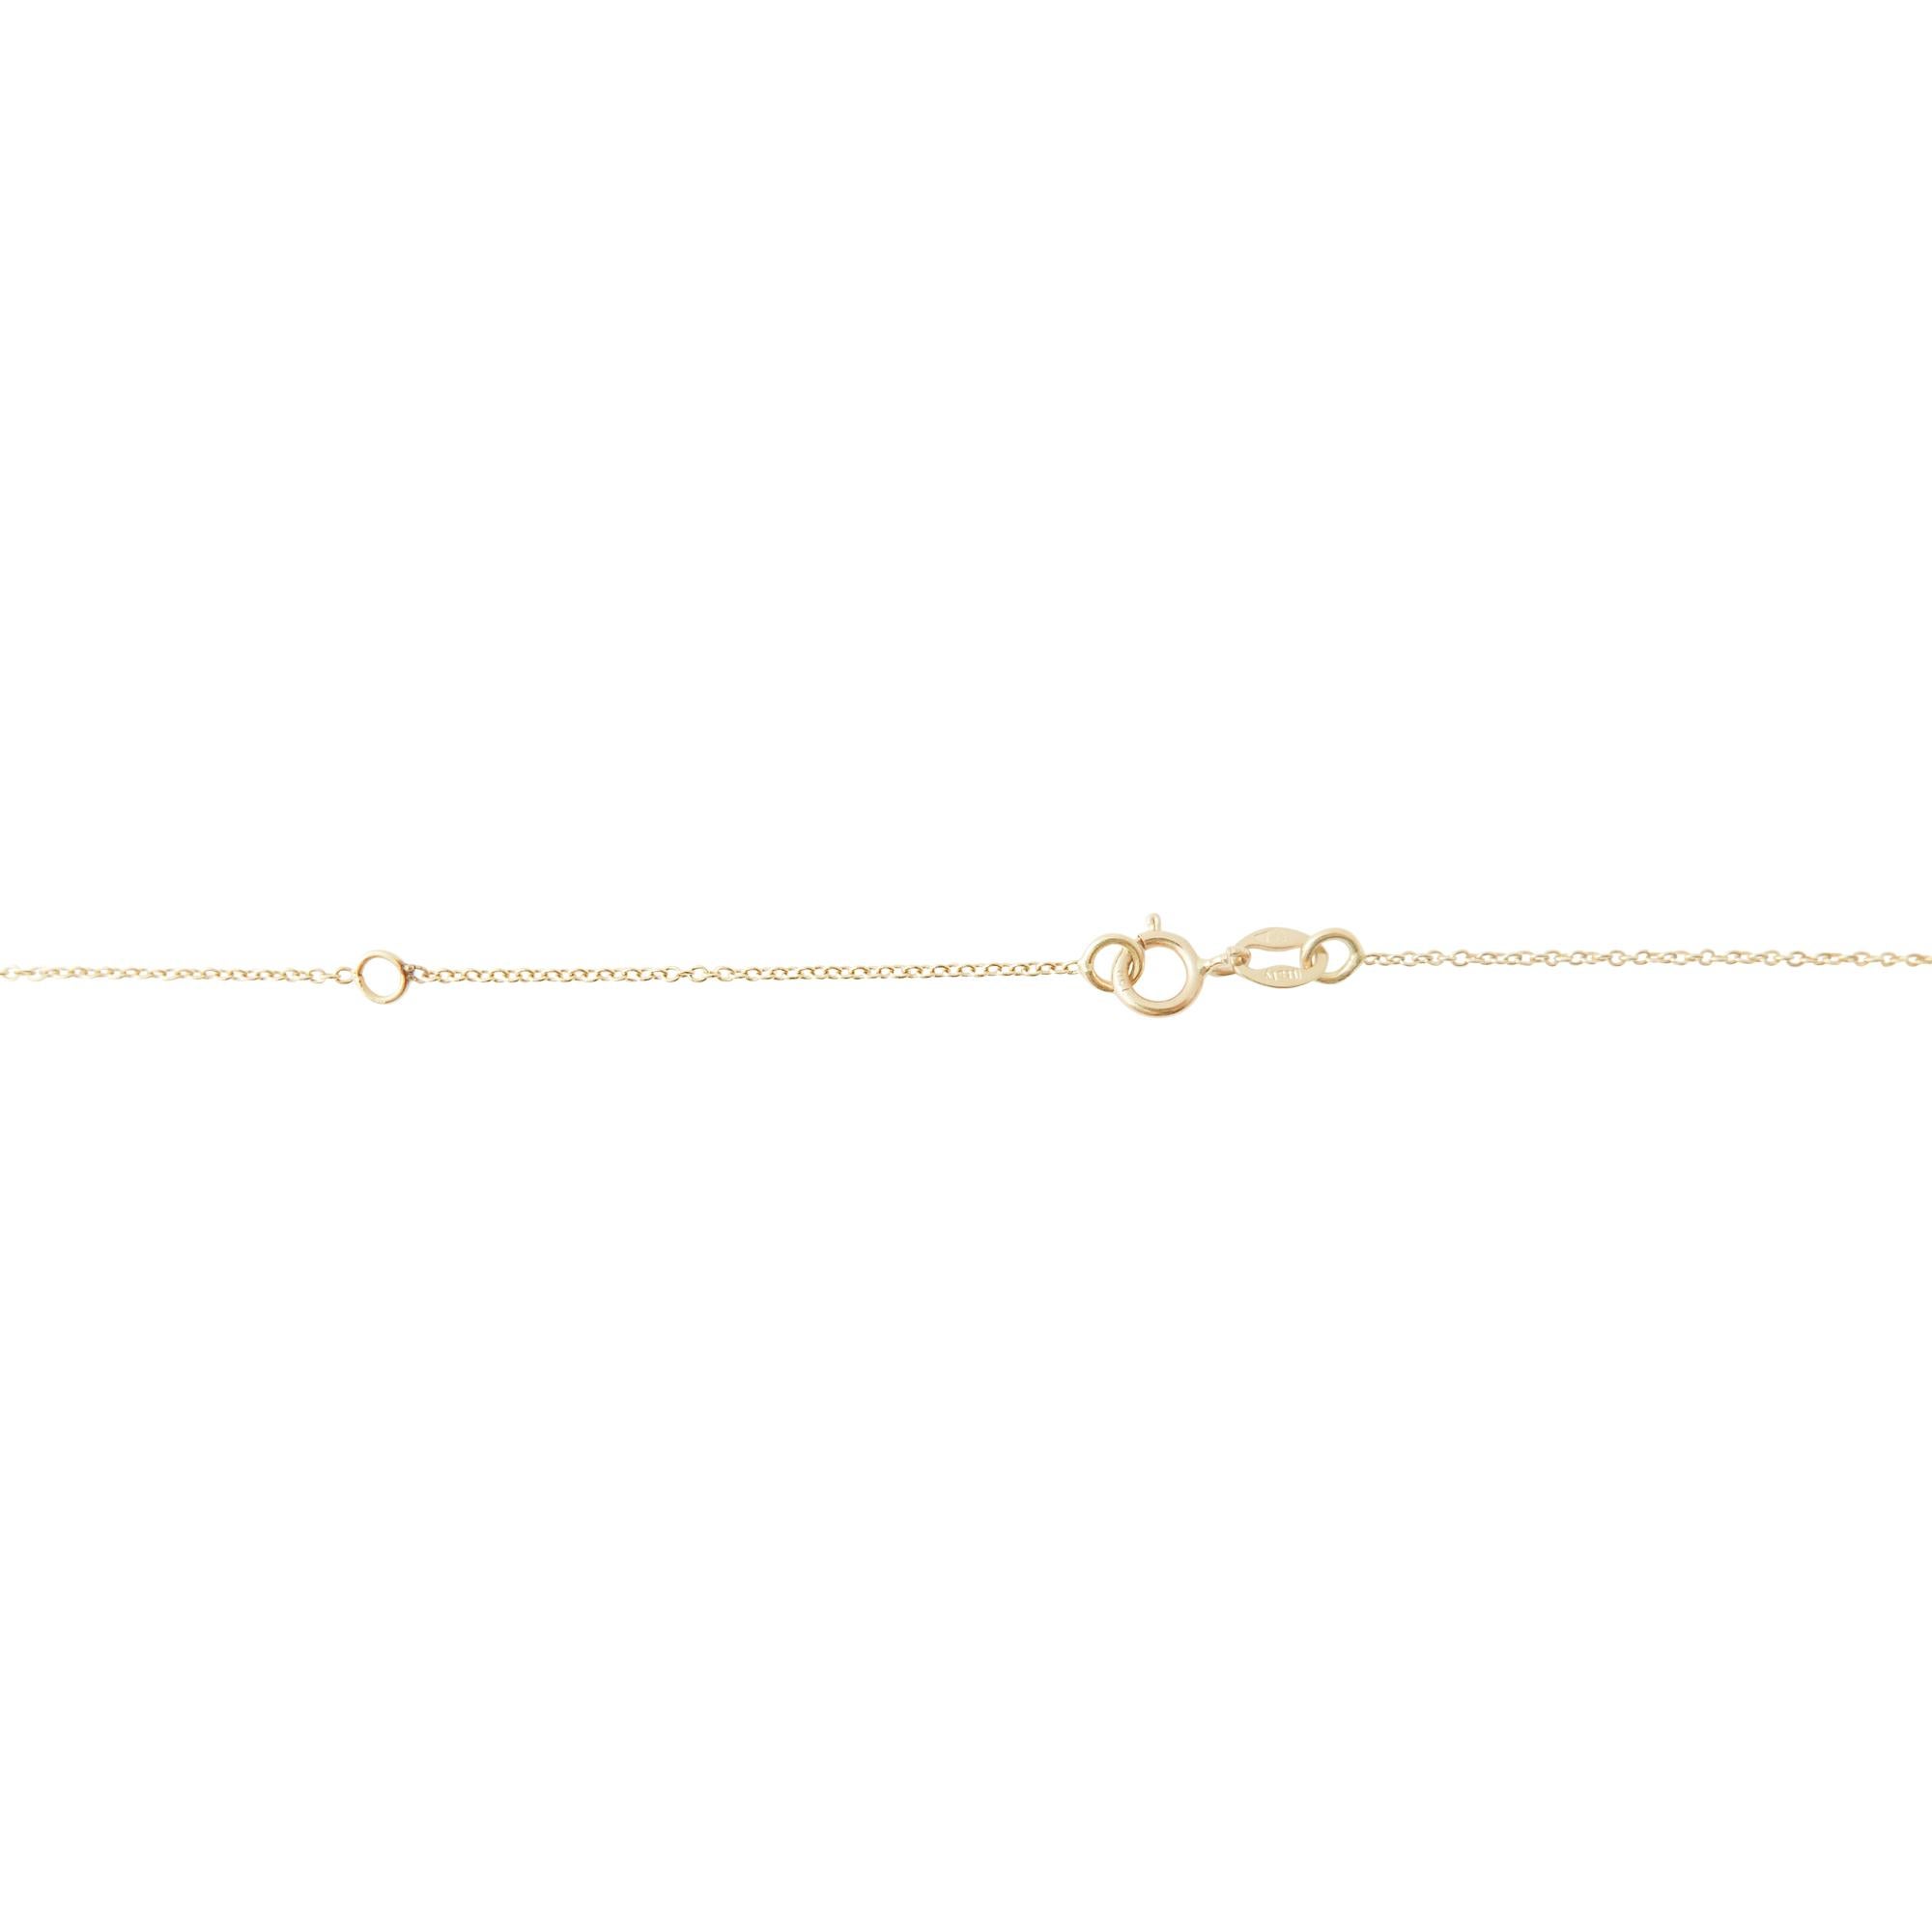 This luxe, minimalist bracelet features a pink sapphire briolette strung on fine 9-carat yellow gold chain, with a total sapphire carat weight of approximately 0.2 carat.  Bracelet length is adjustable with two size settings at 16 and 17